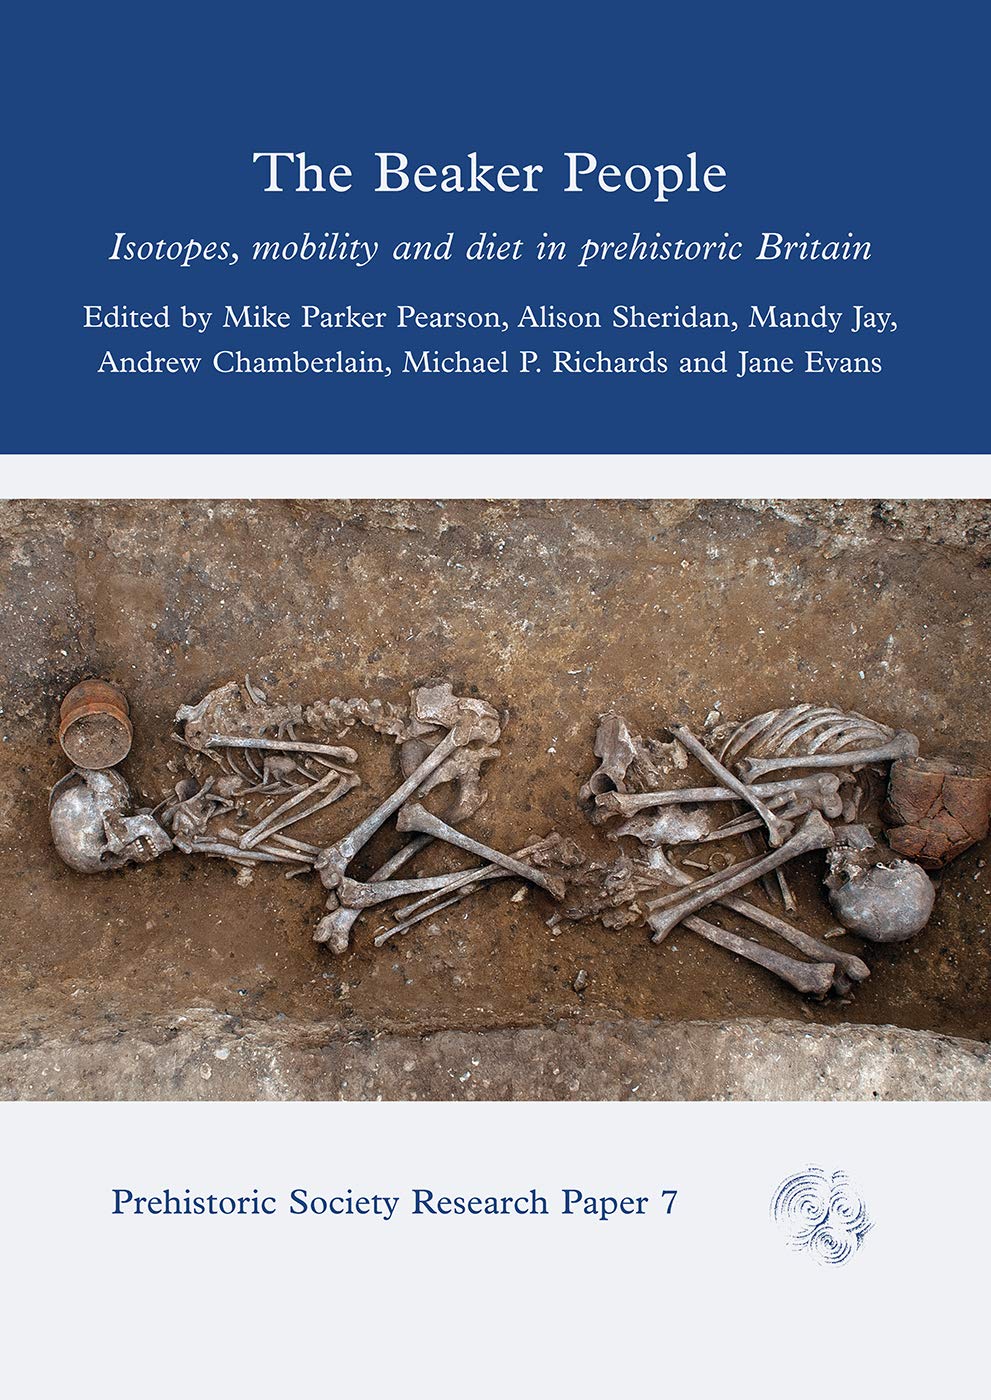 The Beaker People. Isotopes, Mobility and Diet in Prehistoric Britain, 2019, 616 p.